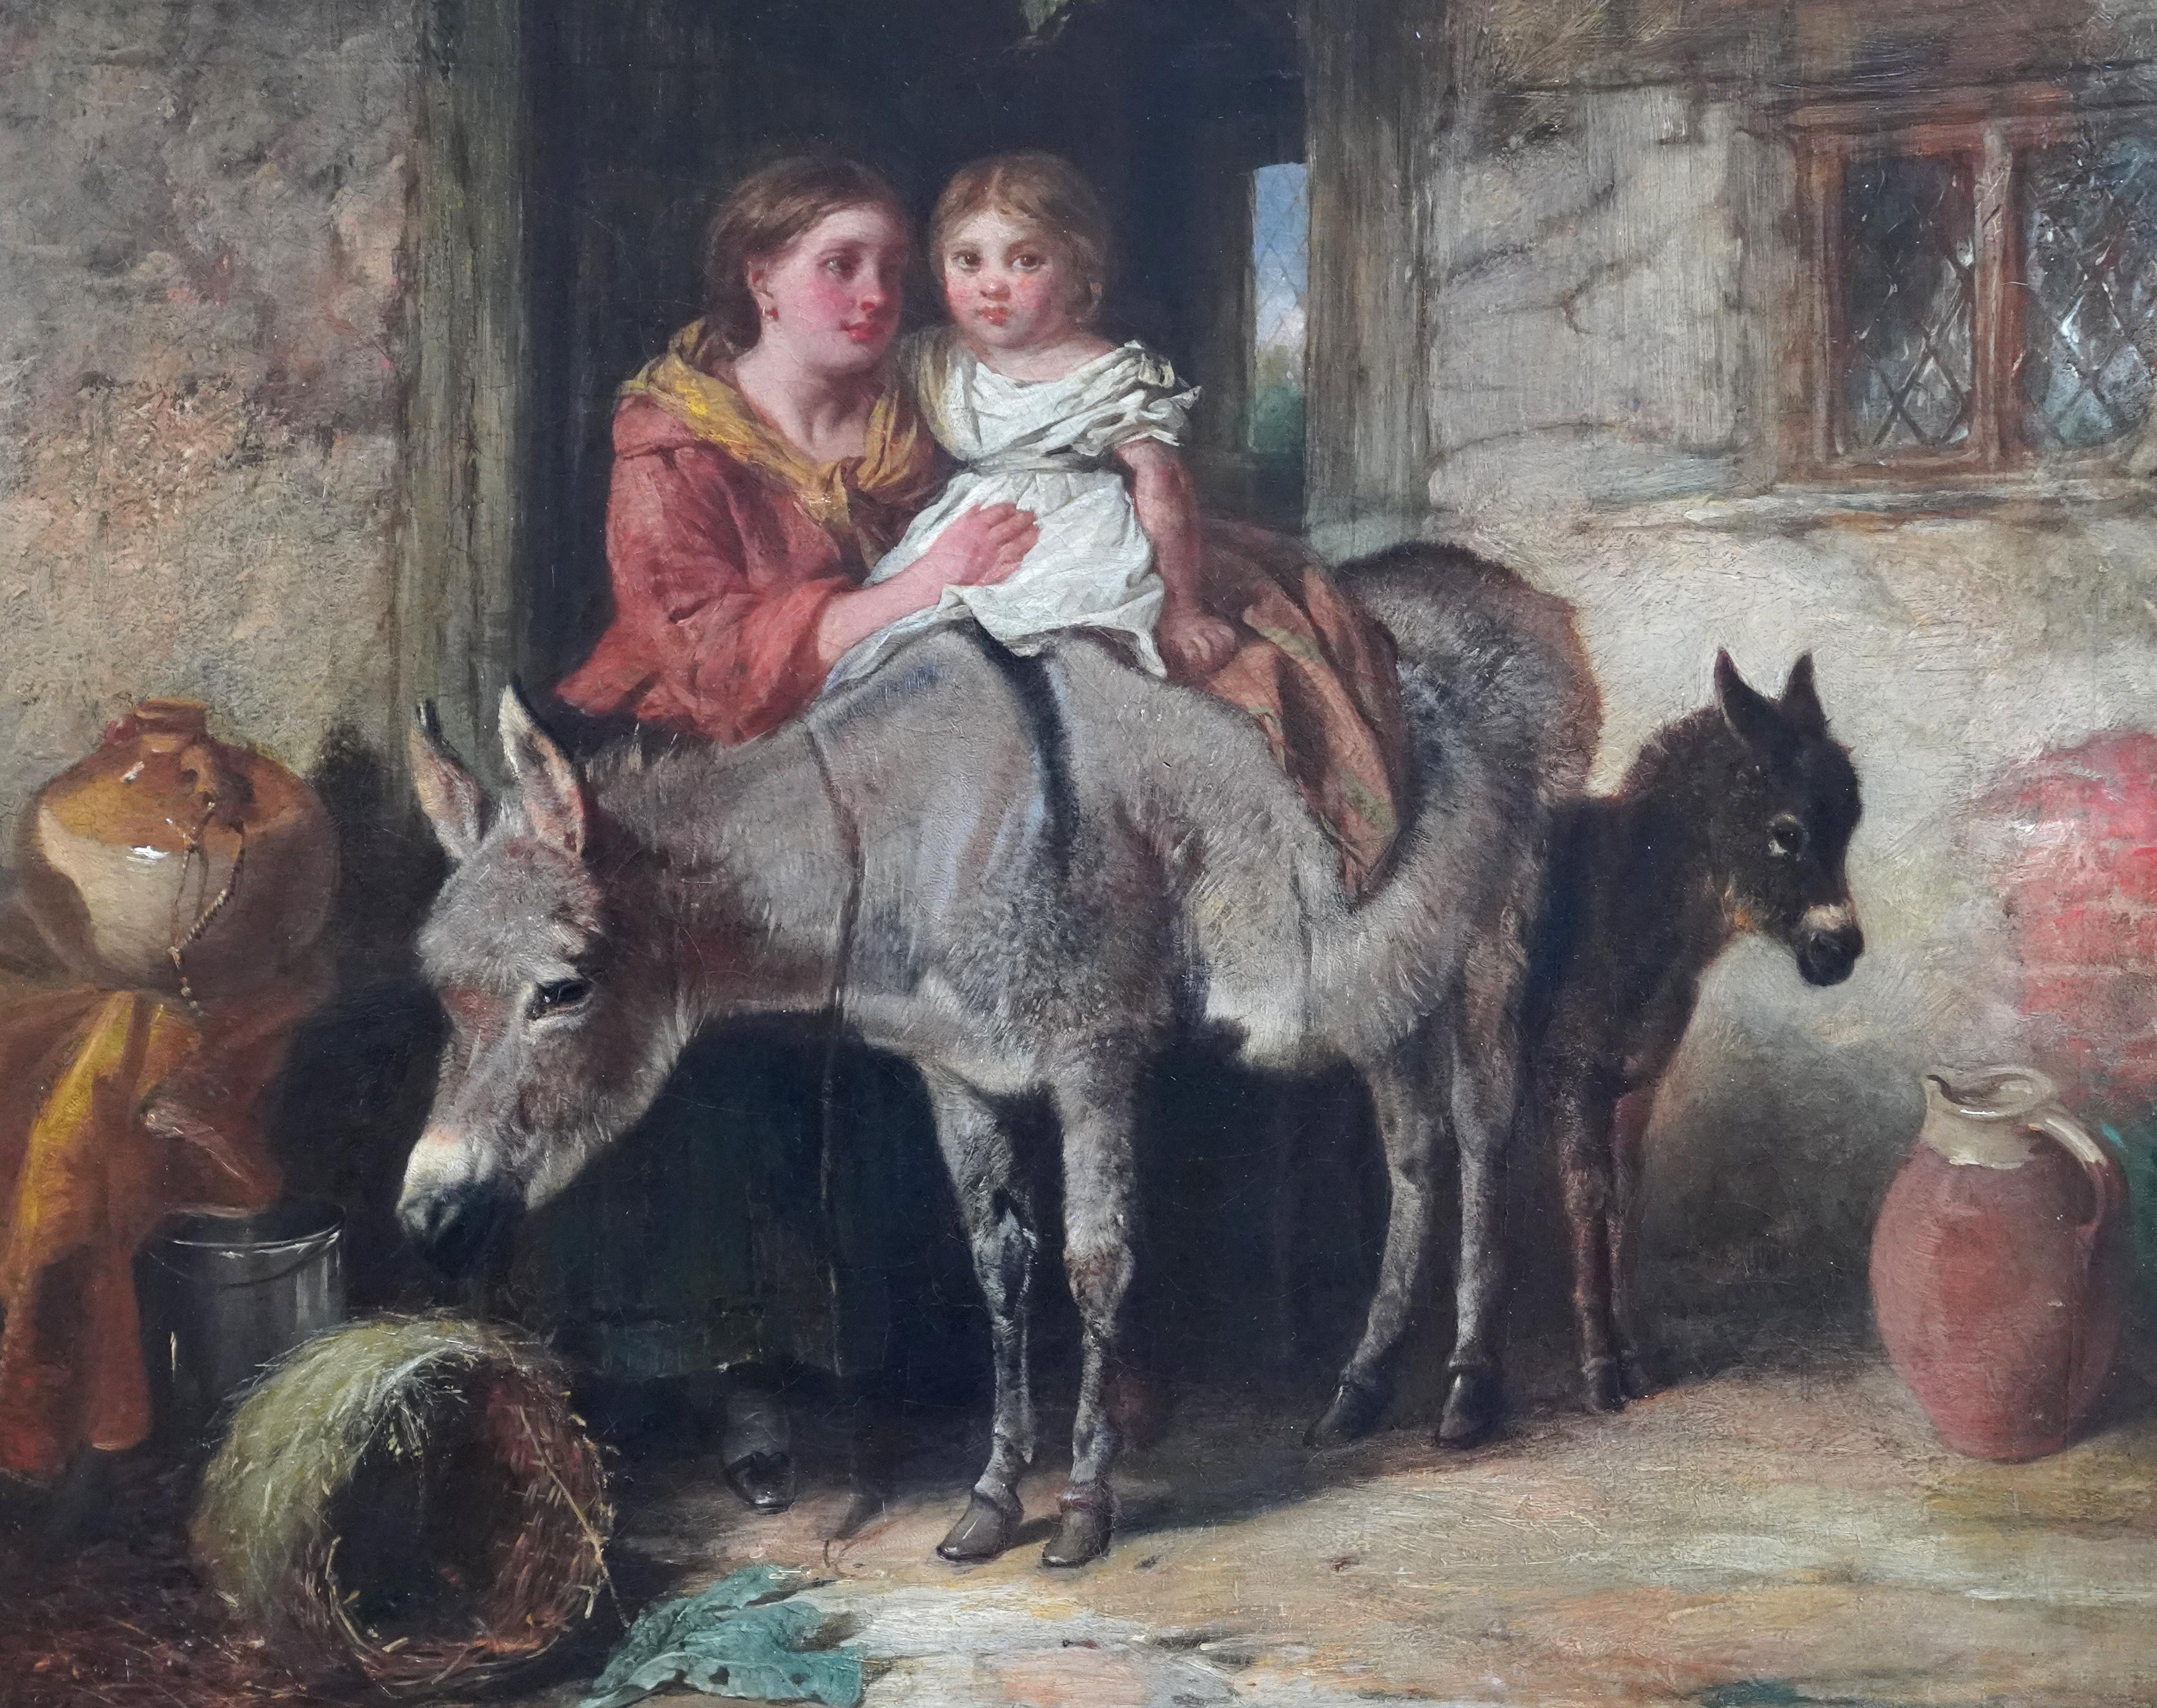 Portrait of Mother, Child and Donkey - British 19th century genre oil painting - Painting by Isaac Henzell